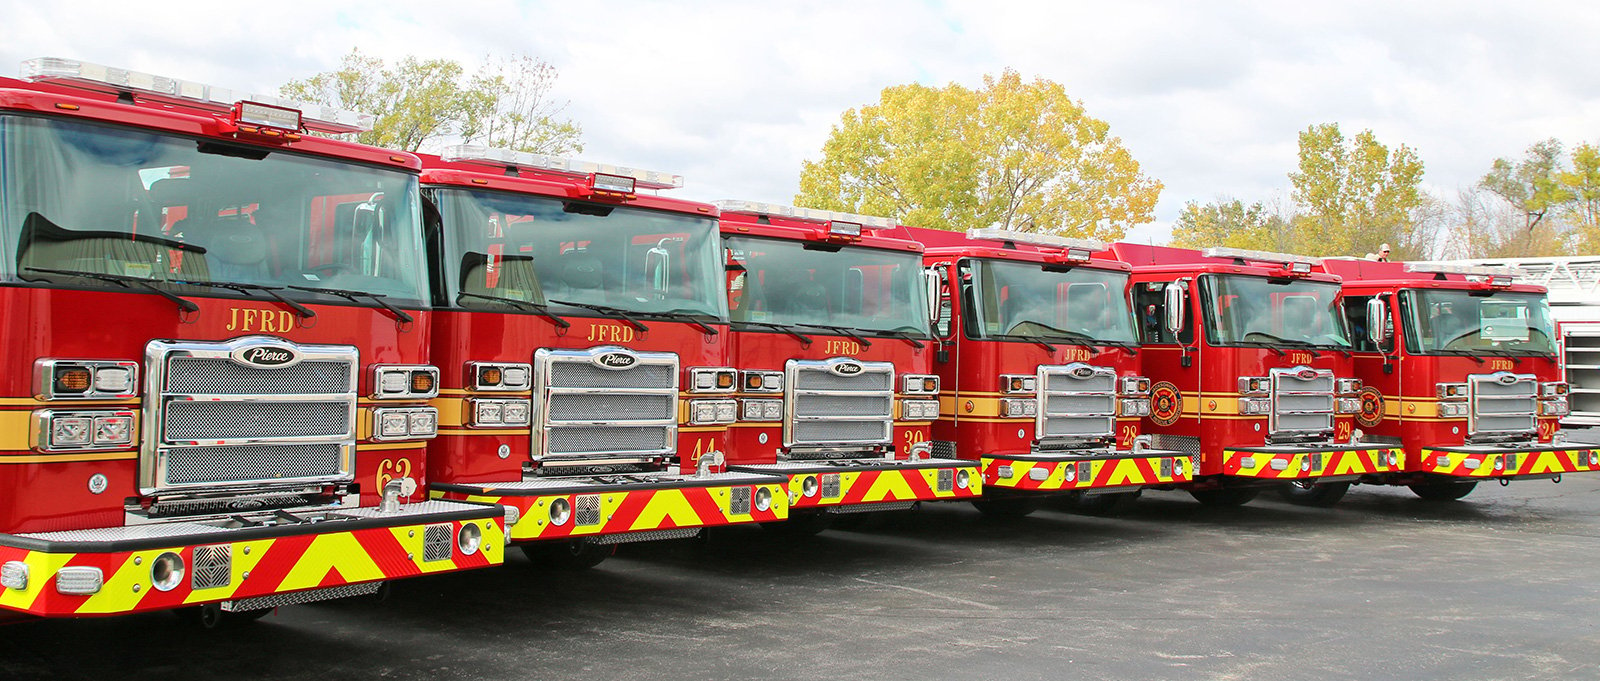 Company Two Sell Fire Trucks